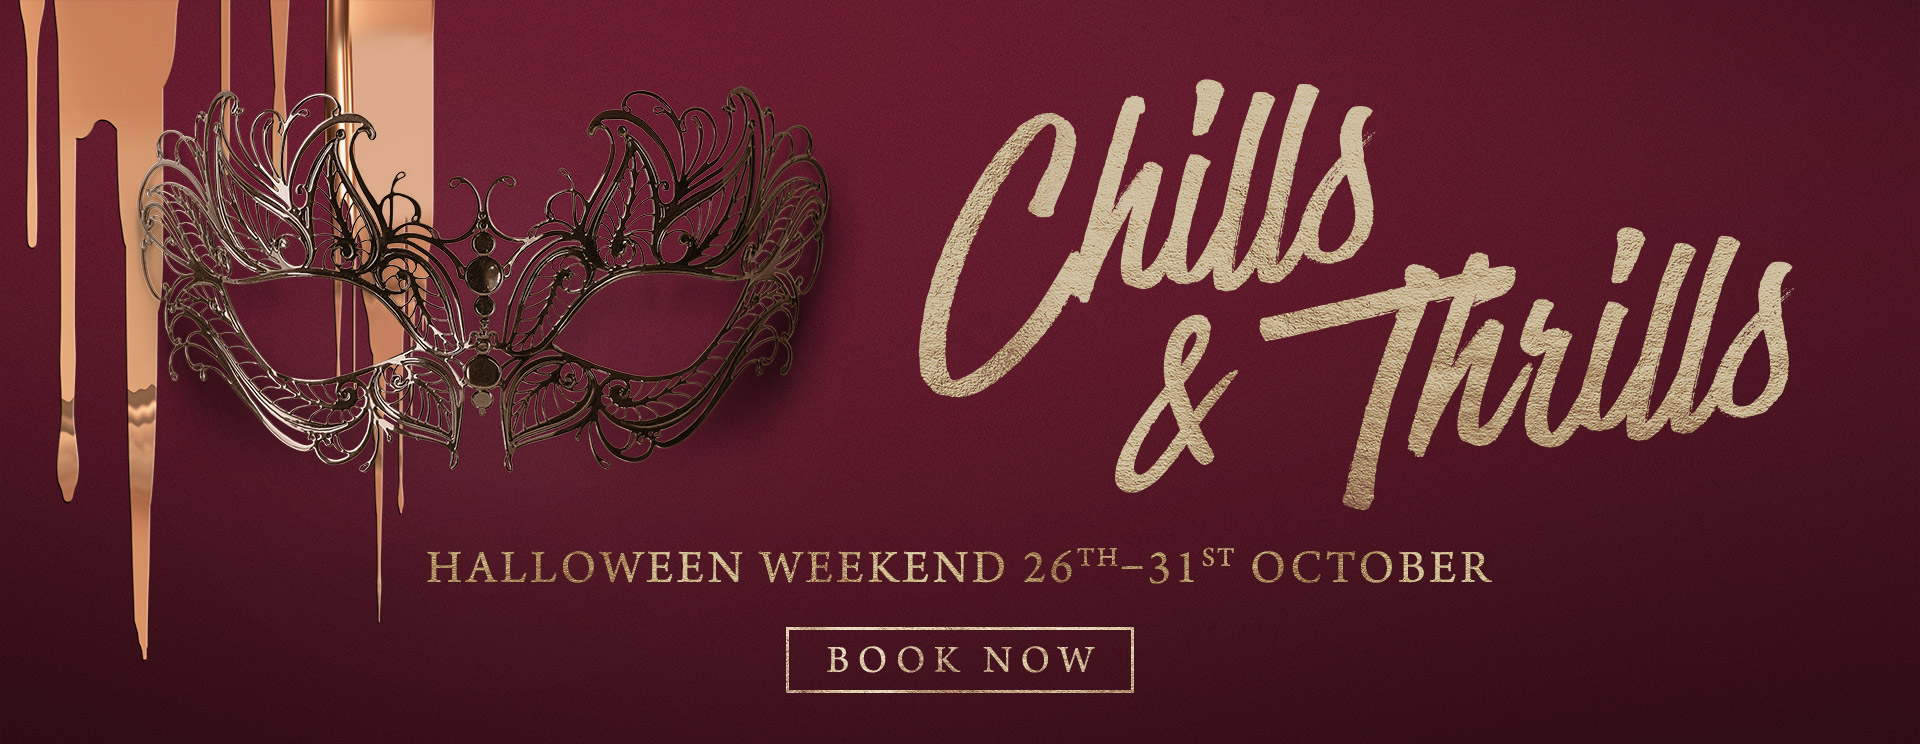 Chills & Thrills this Halloween at The Oat Sheaf